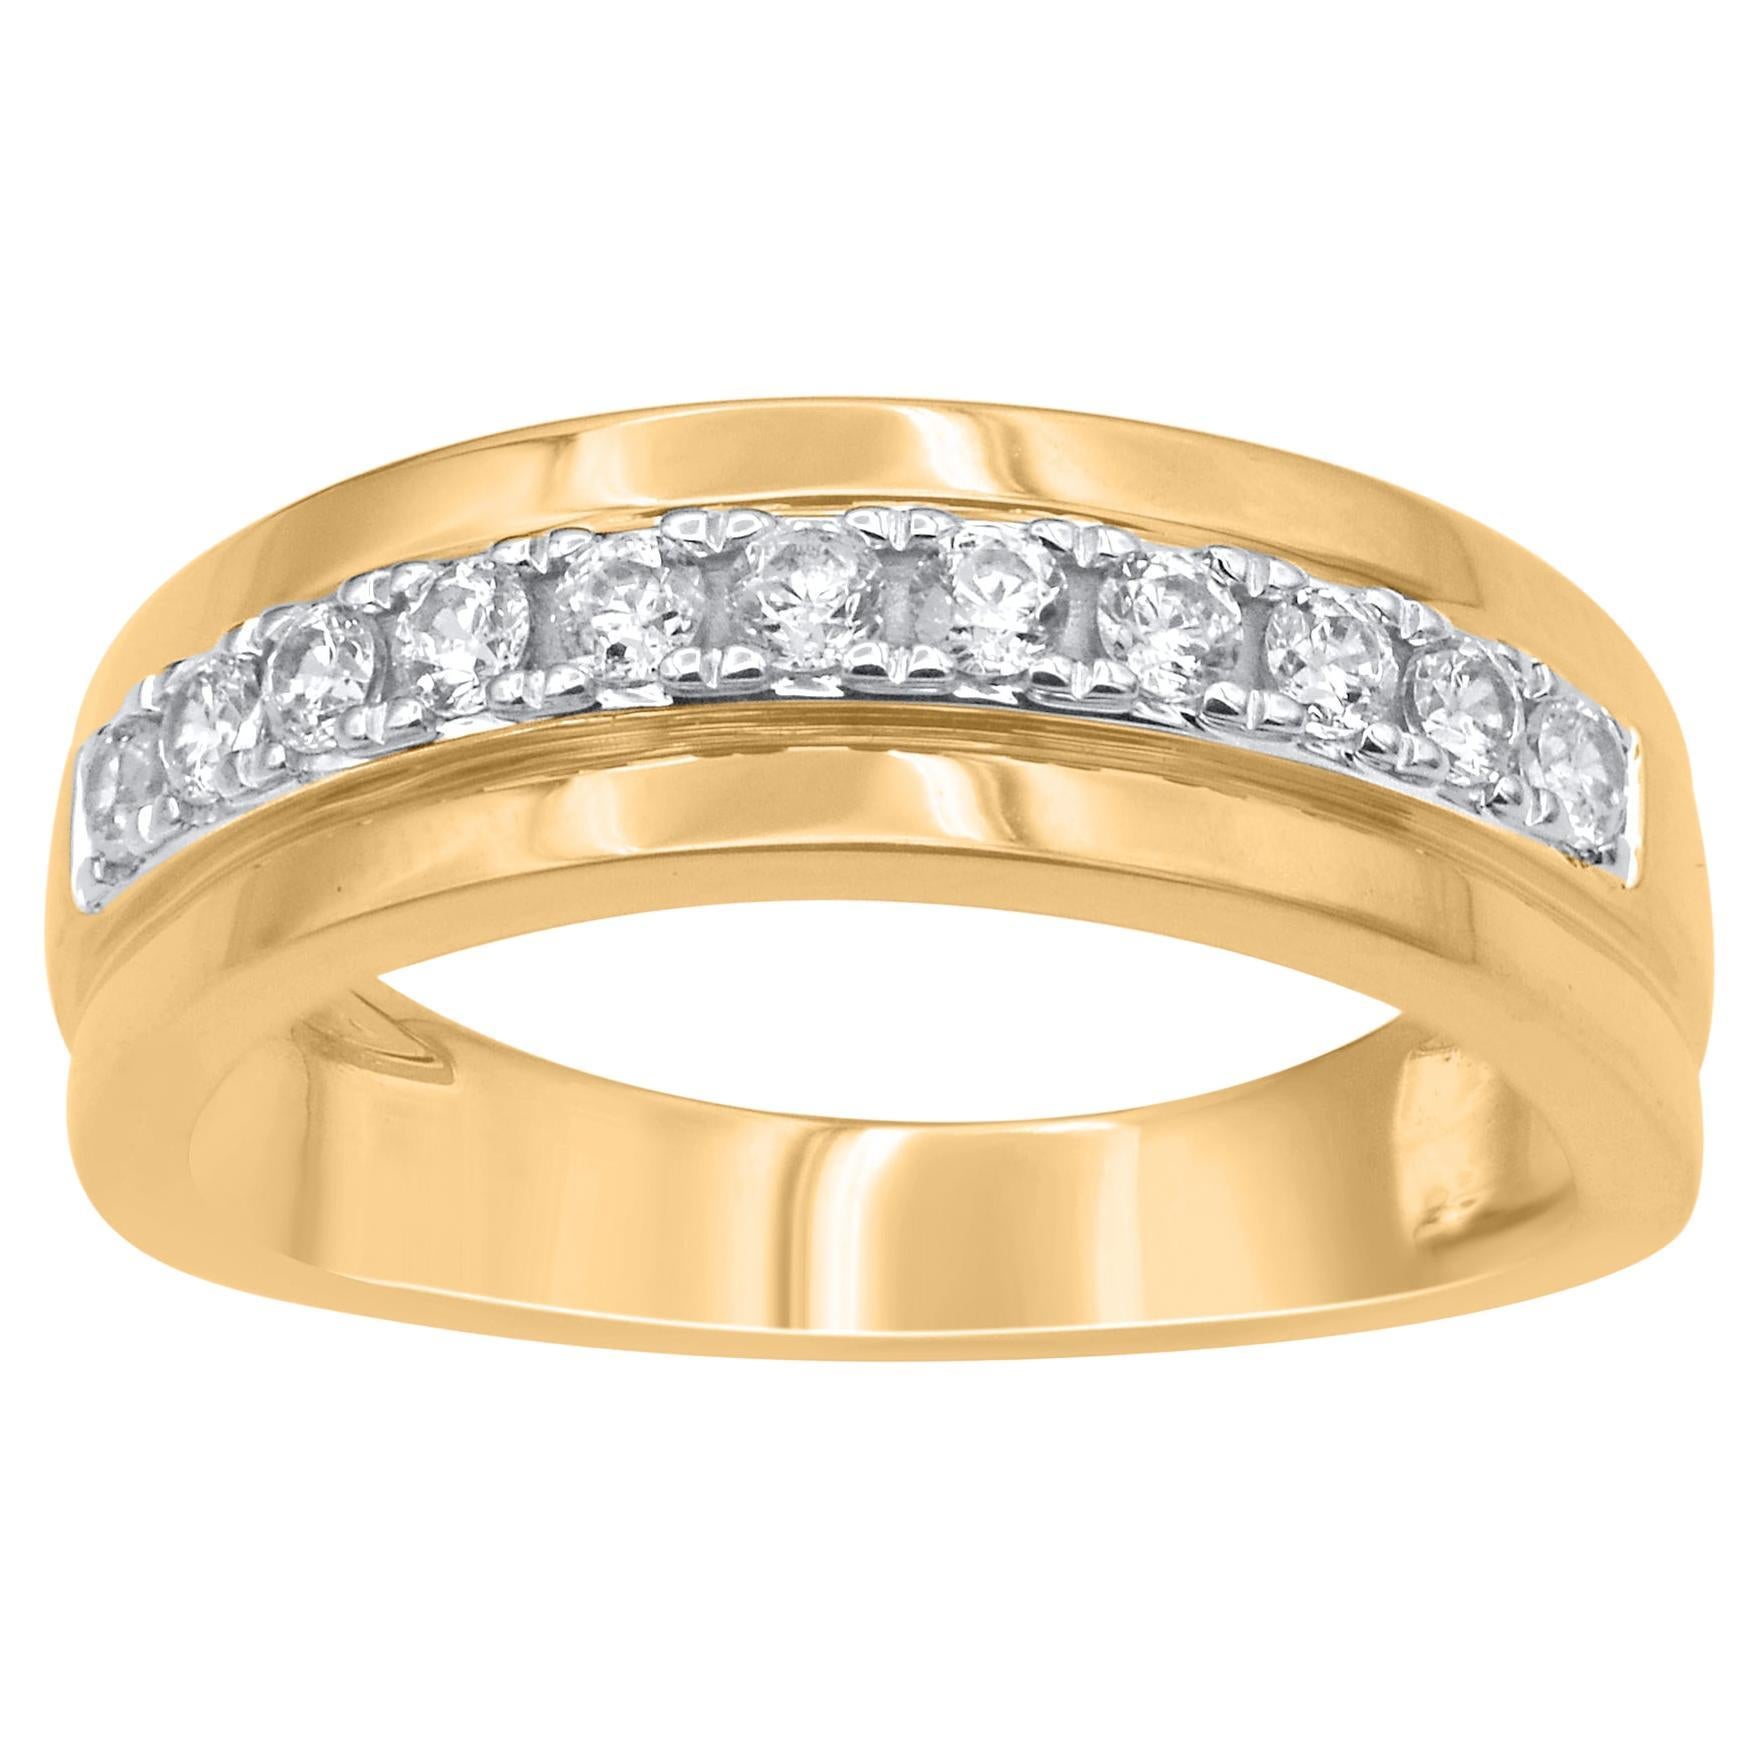 TJD 0.50 Carat Brilliant Cut Natural Diamond 14KT Yellow Gold Men's Band Ring For Sale